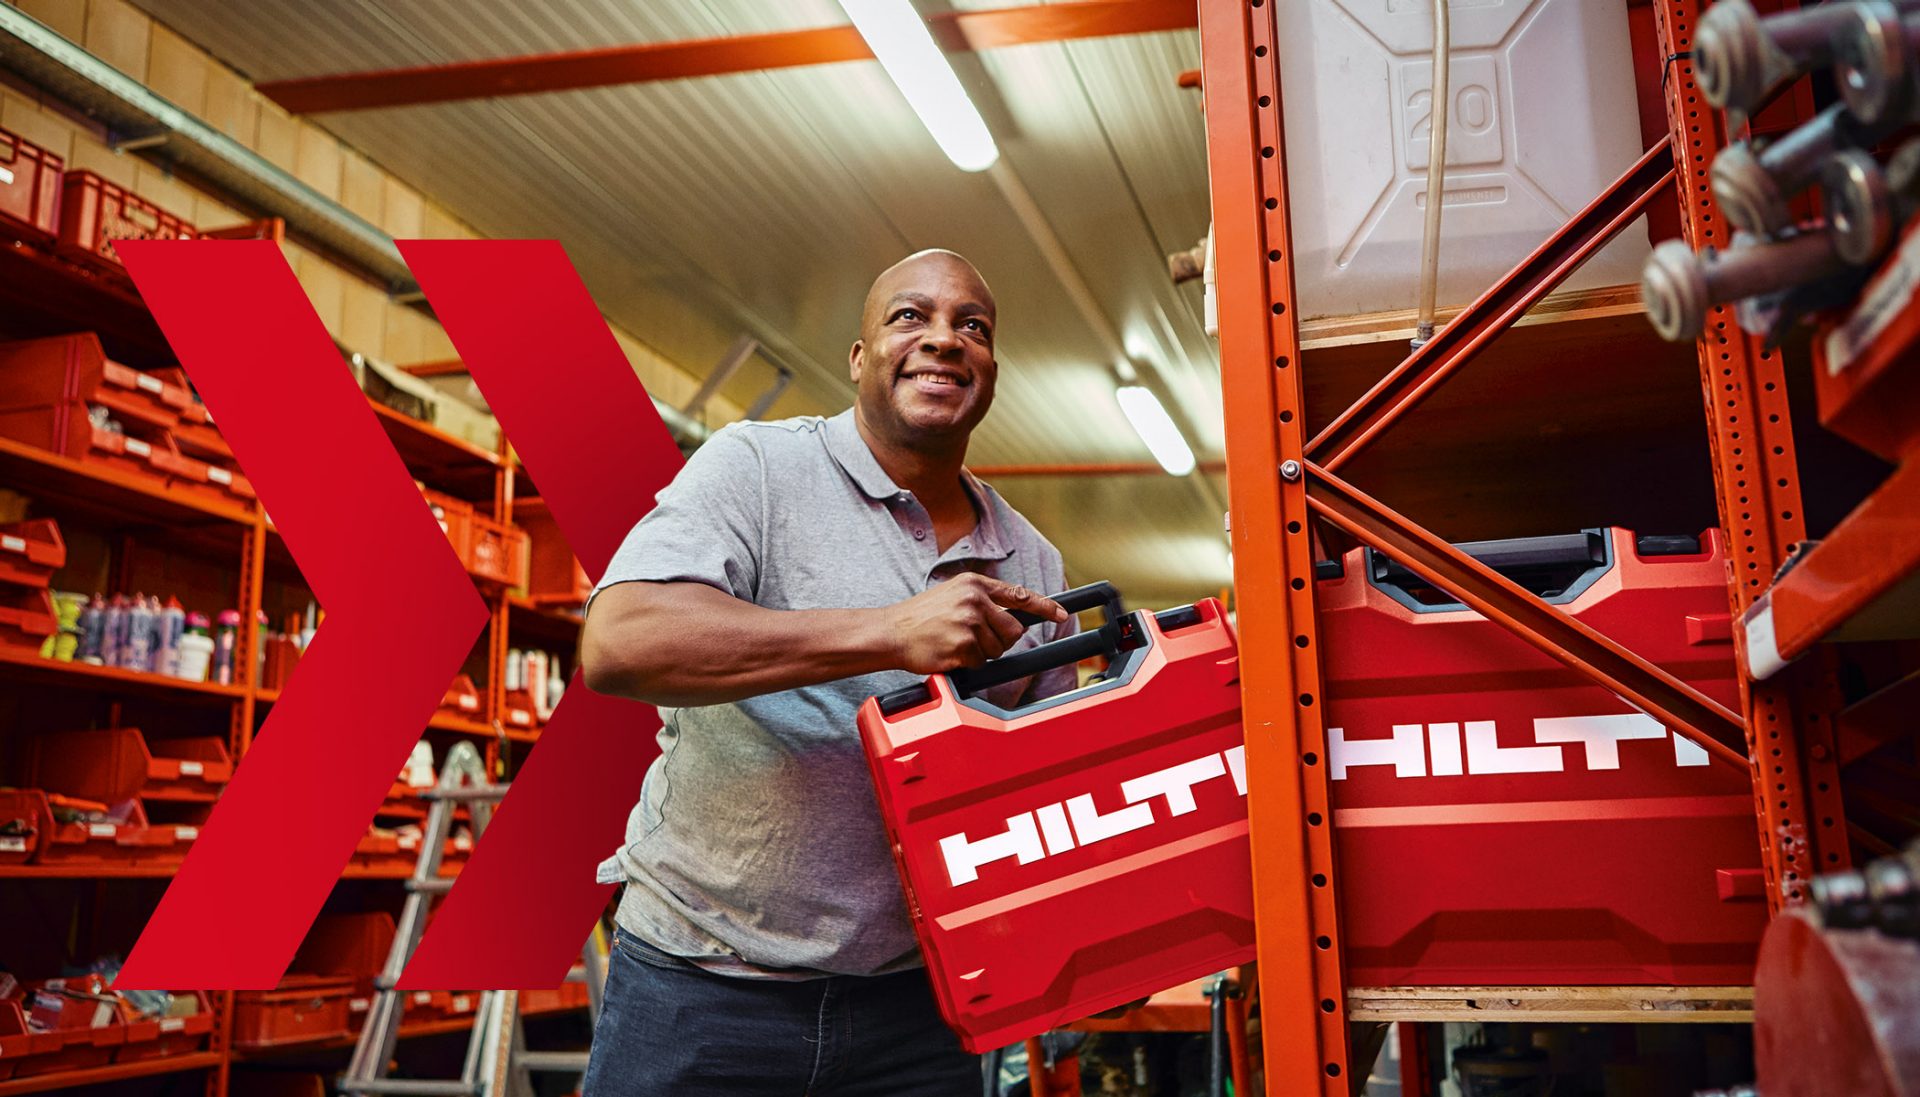 Tool Crib Manager putting away a Hilti Tool Box on a shelf in the warehouse